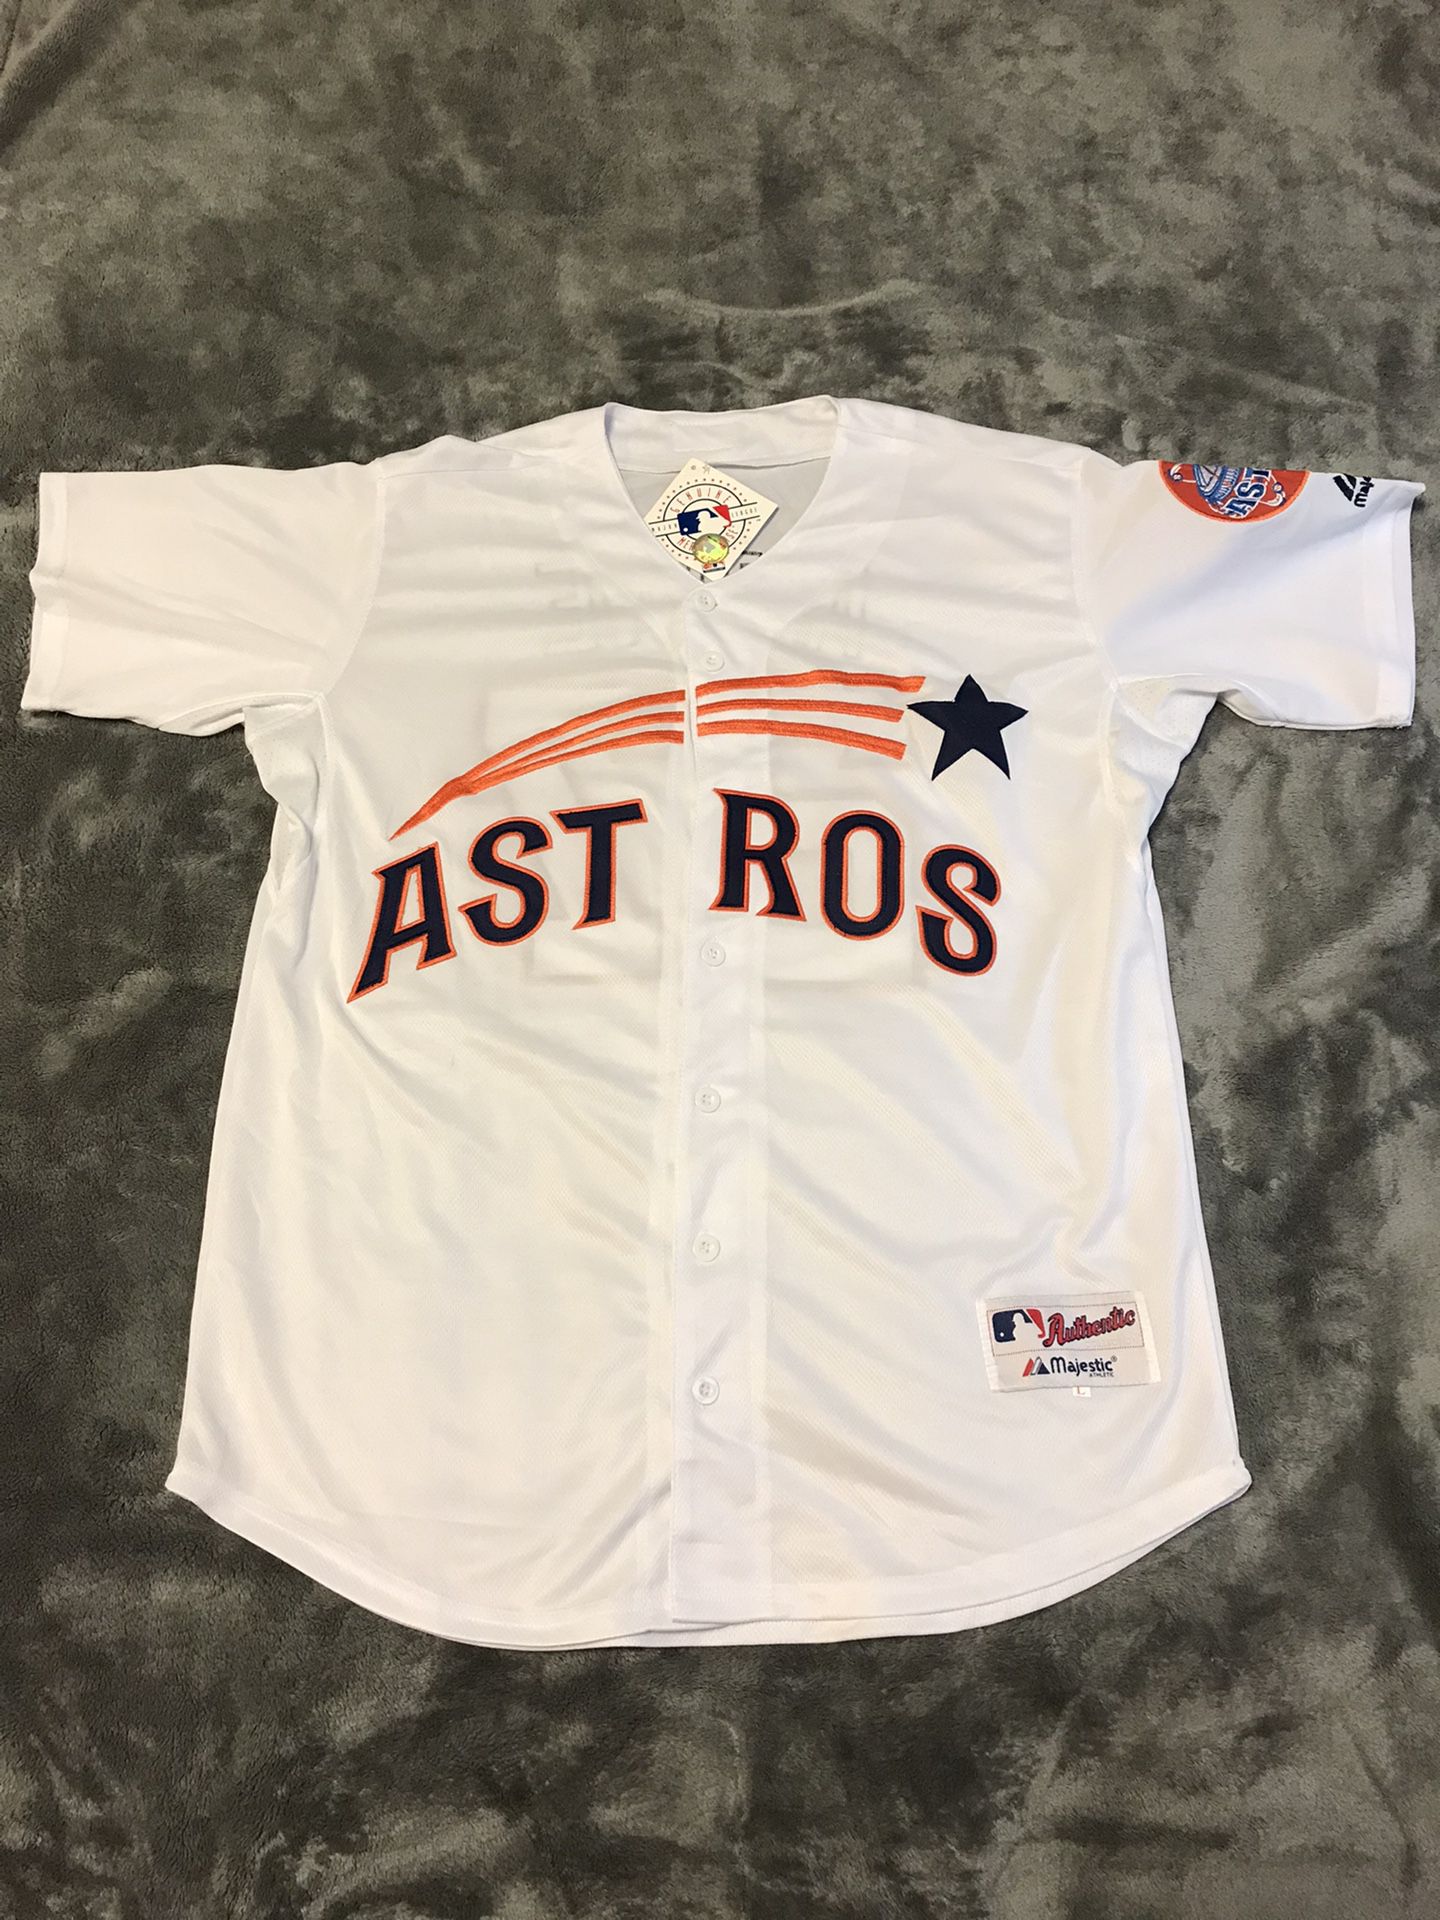 Houston Astros Altuve Throwback Jersey for Sale in Houston, TX